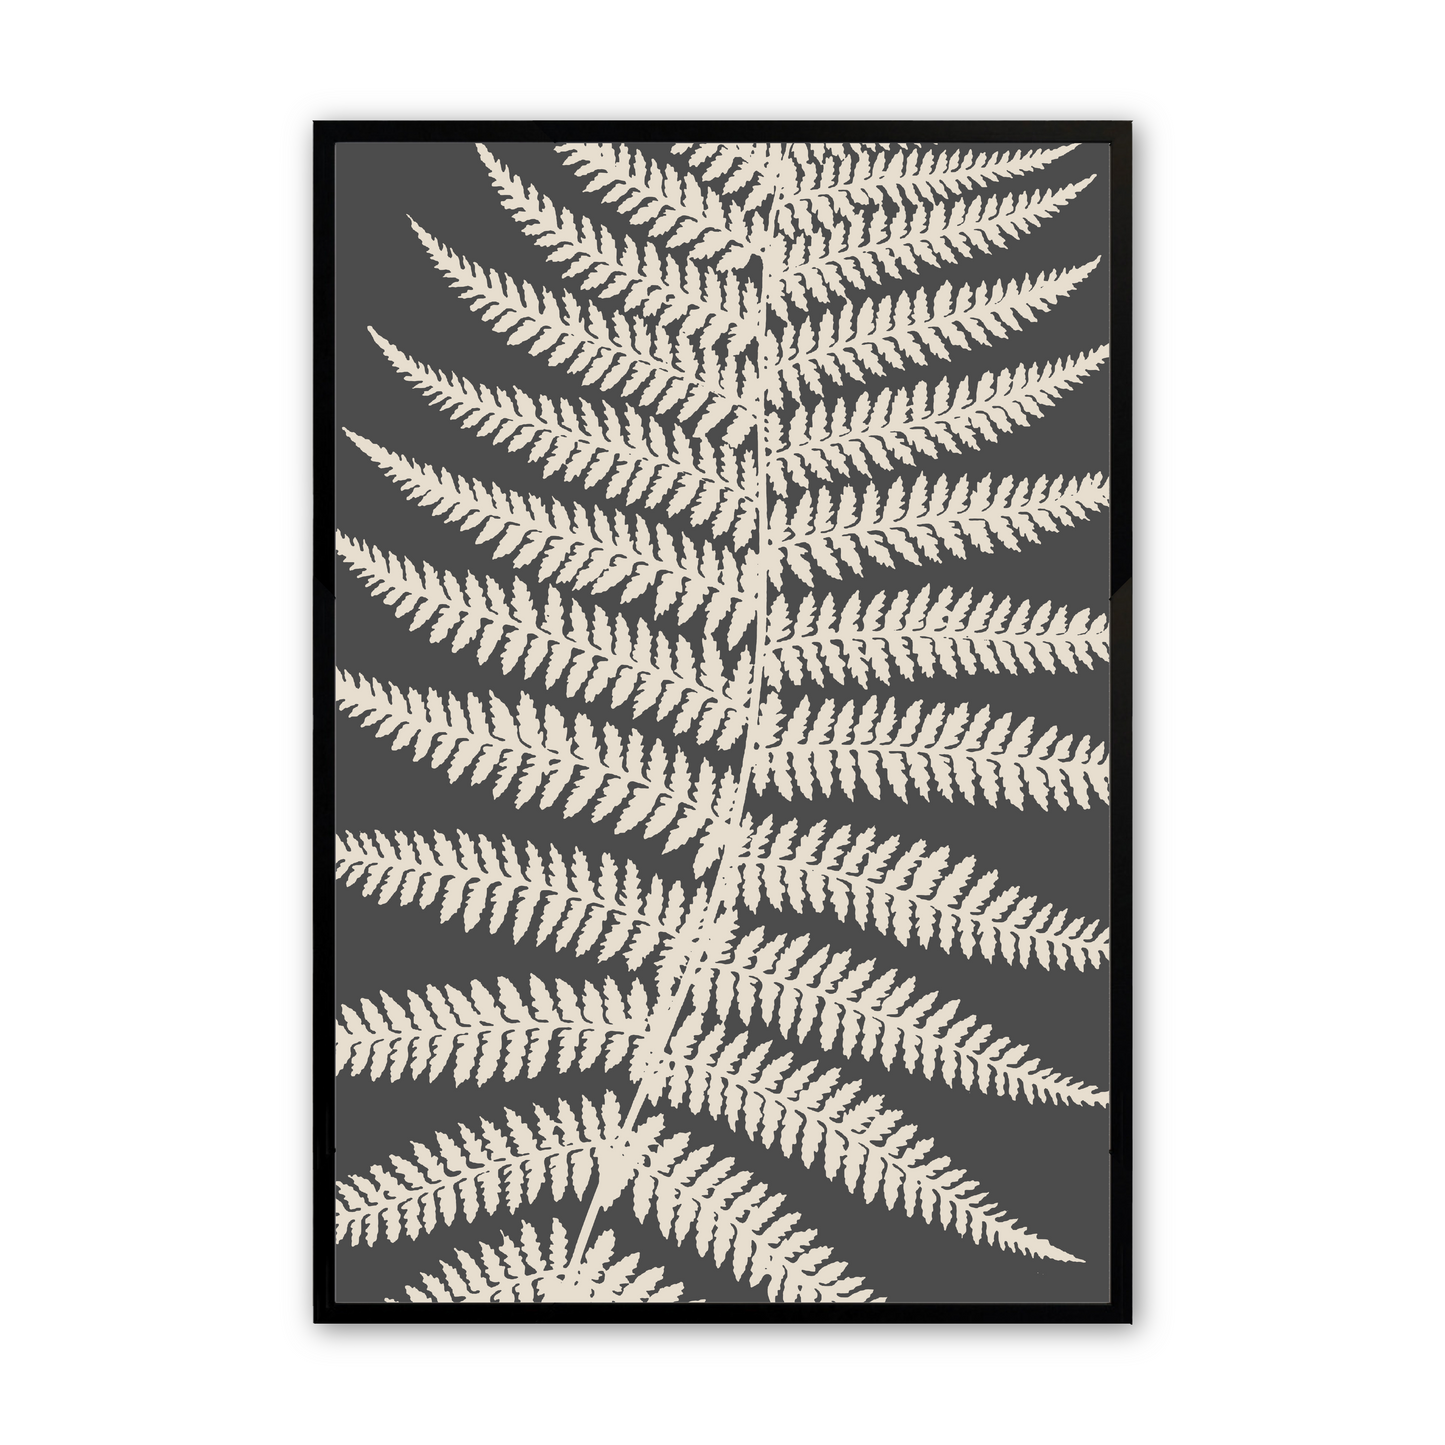 [color:Satin Black], Picture of the third fern in the set